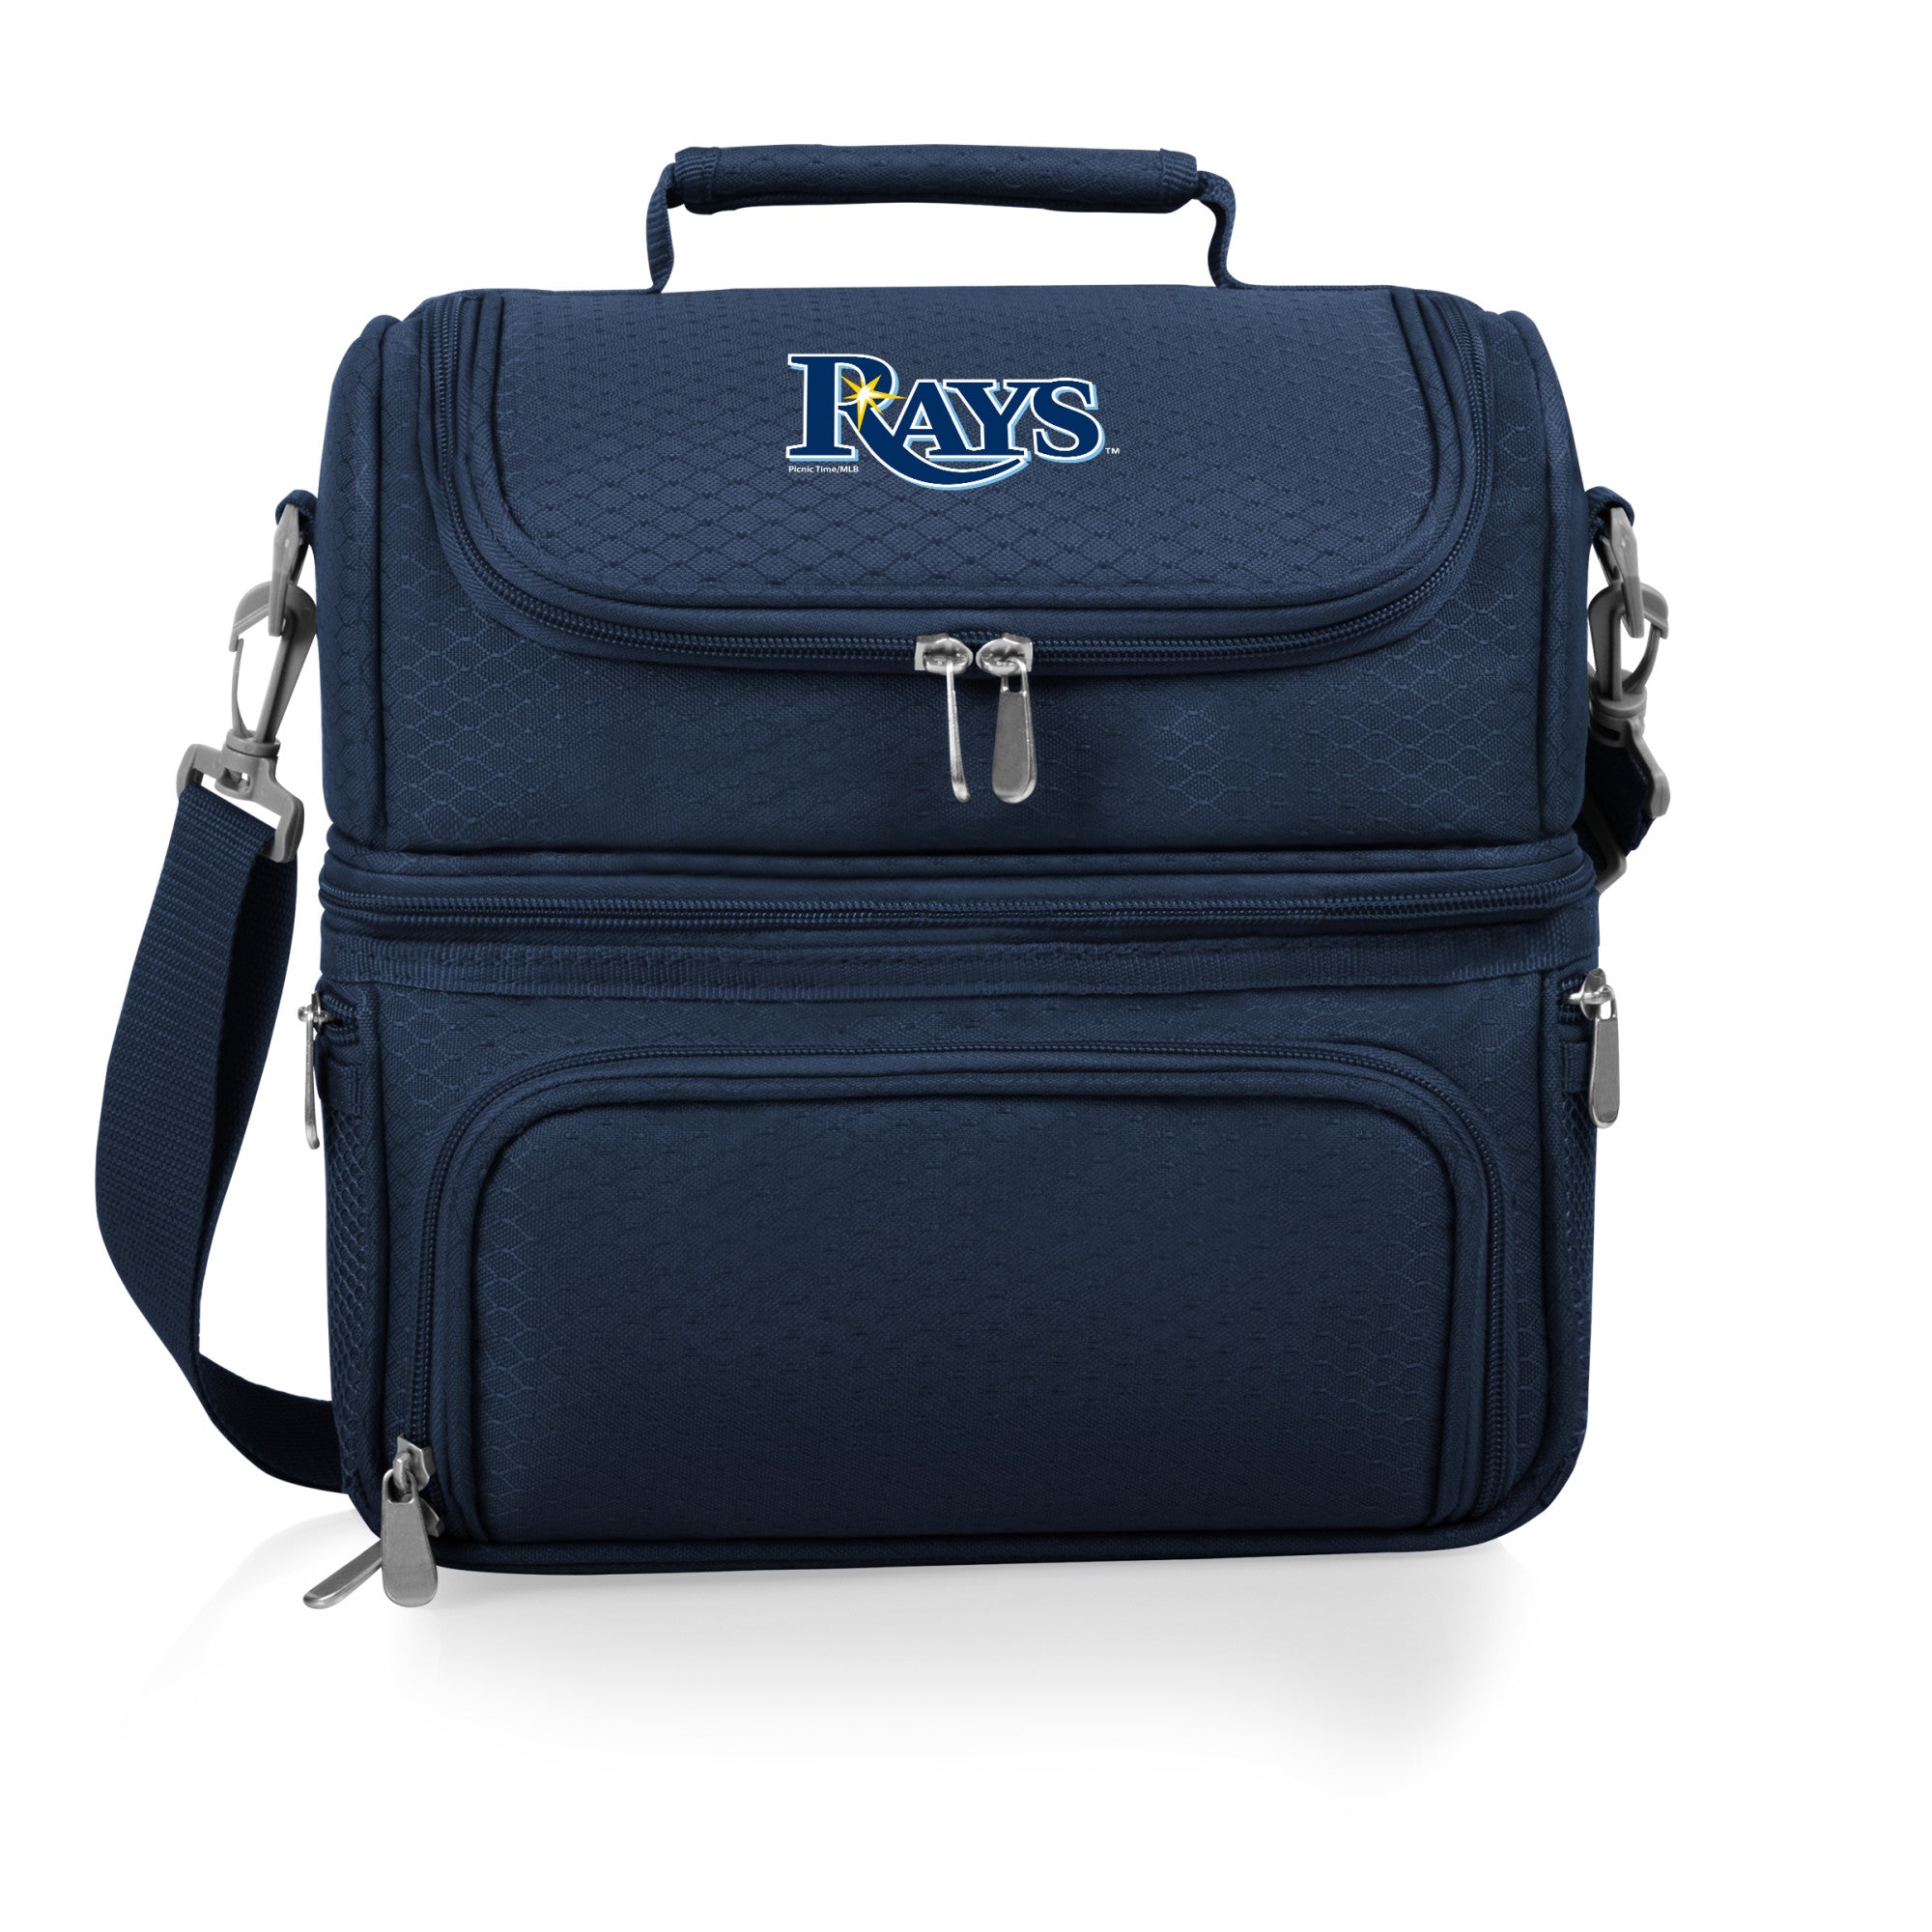 Tampa Bay Rays - Pranzo Lunch Bag Cooler with Utensils